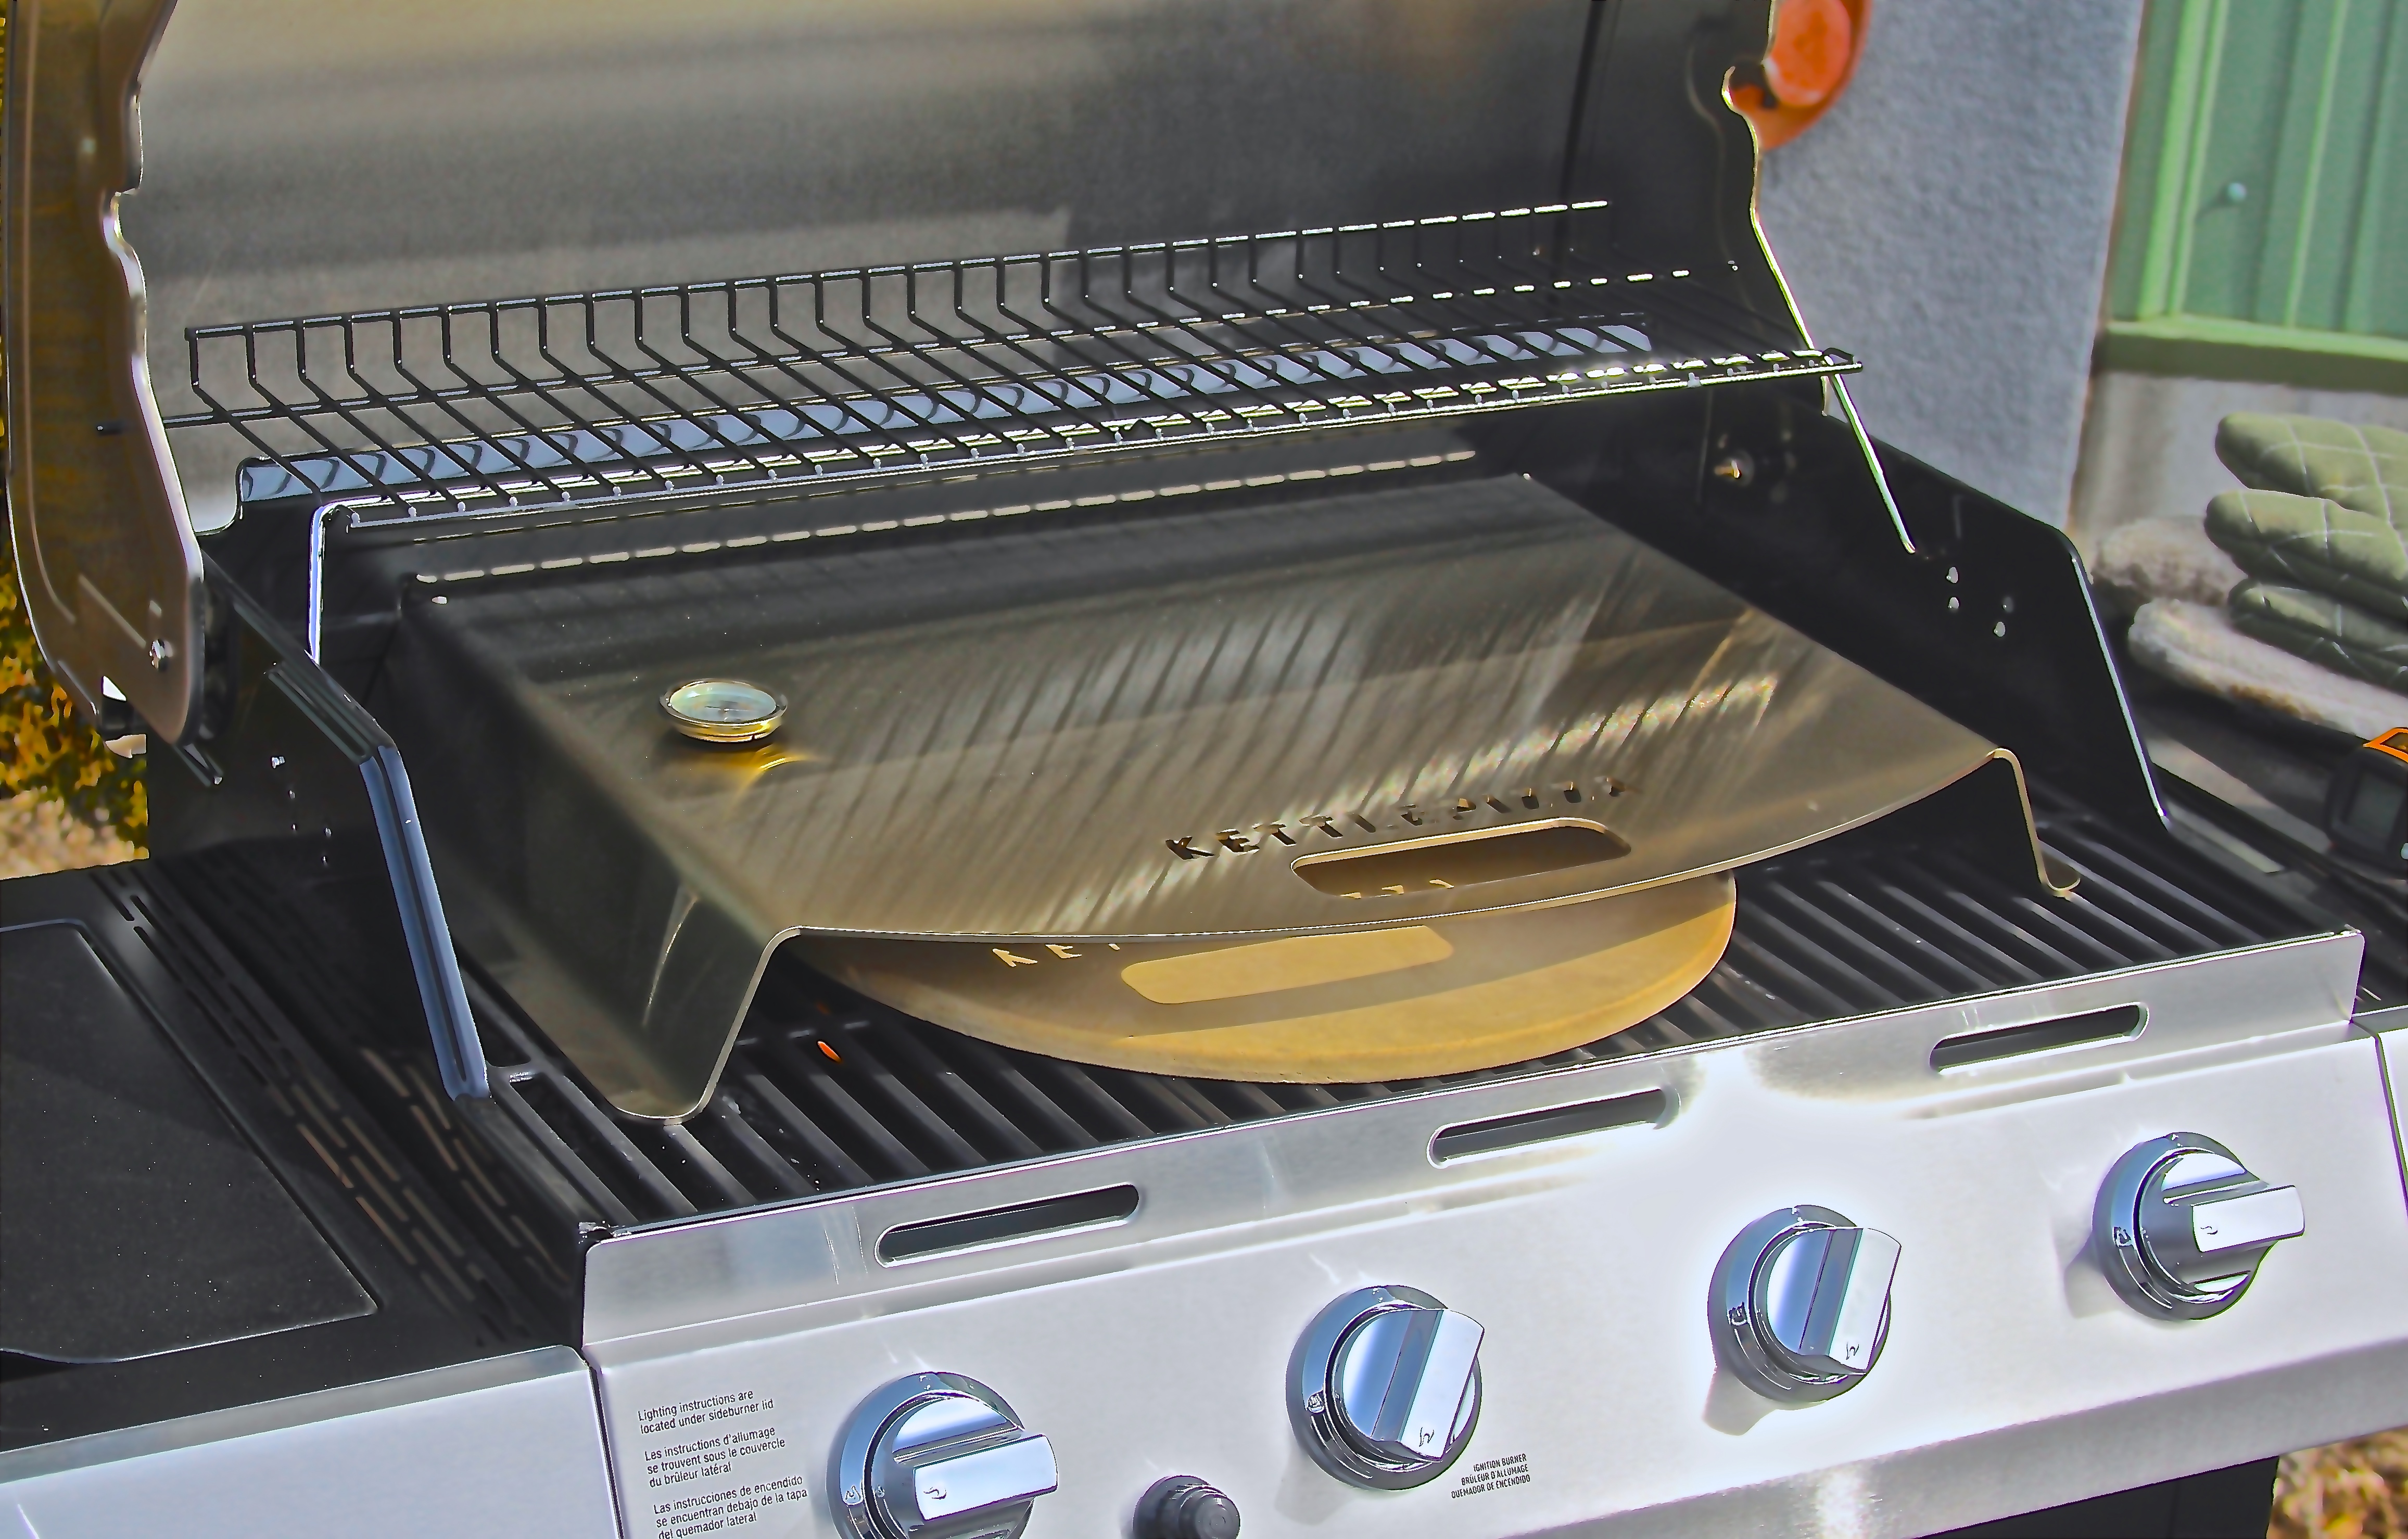 KettlePizza Launches Gas Pro Model For Cooking Perfect Pizza On